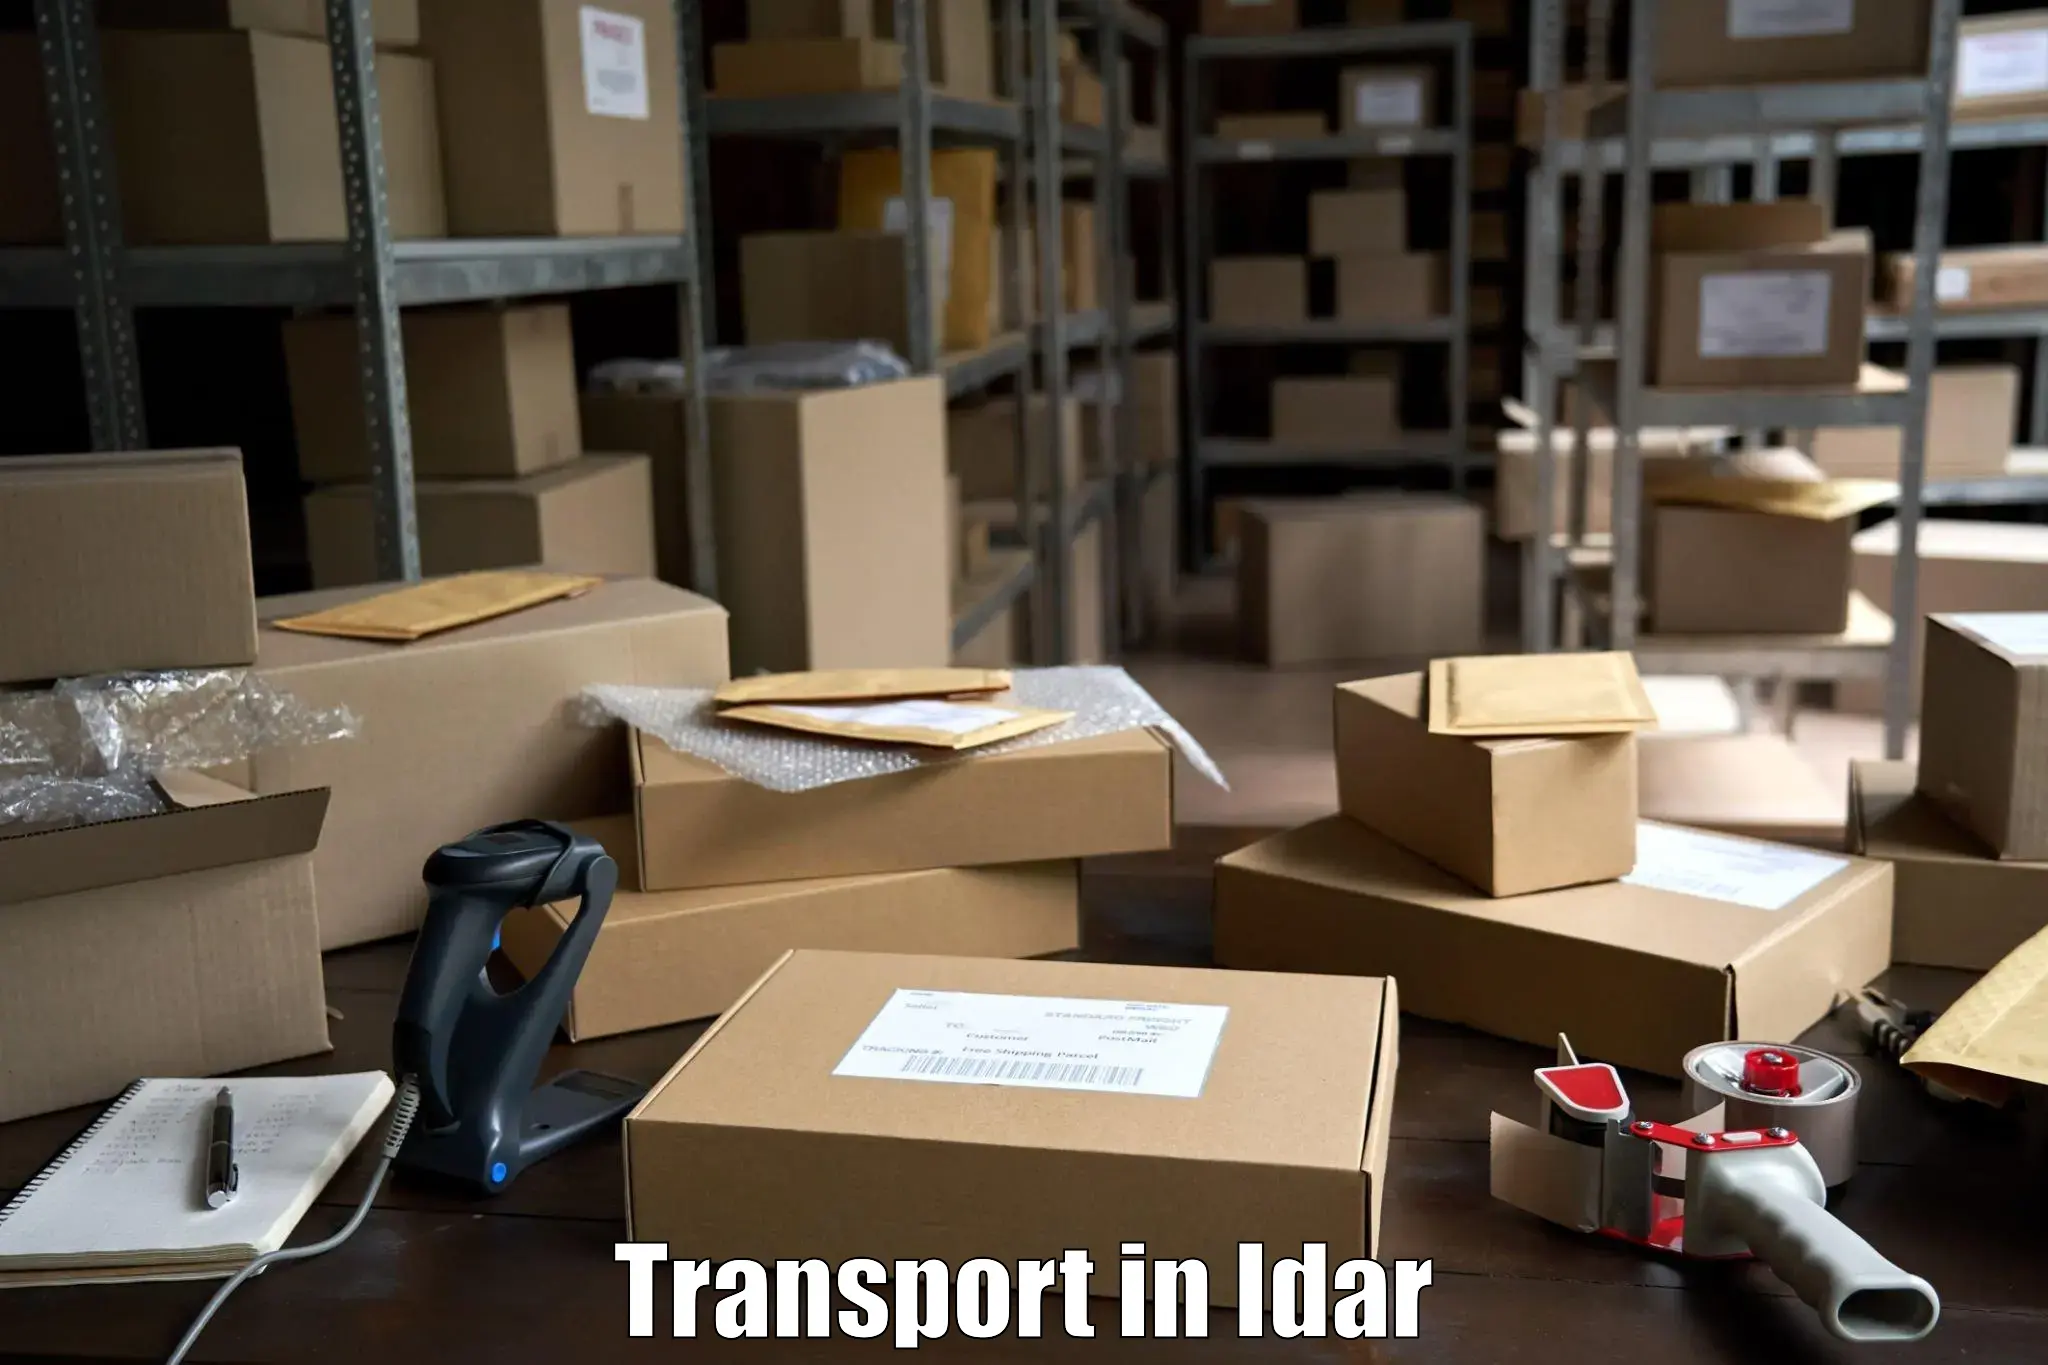 Vehicle transport services in Idar